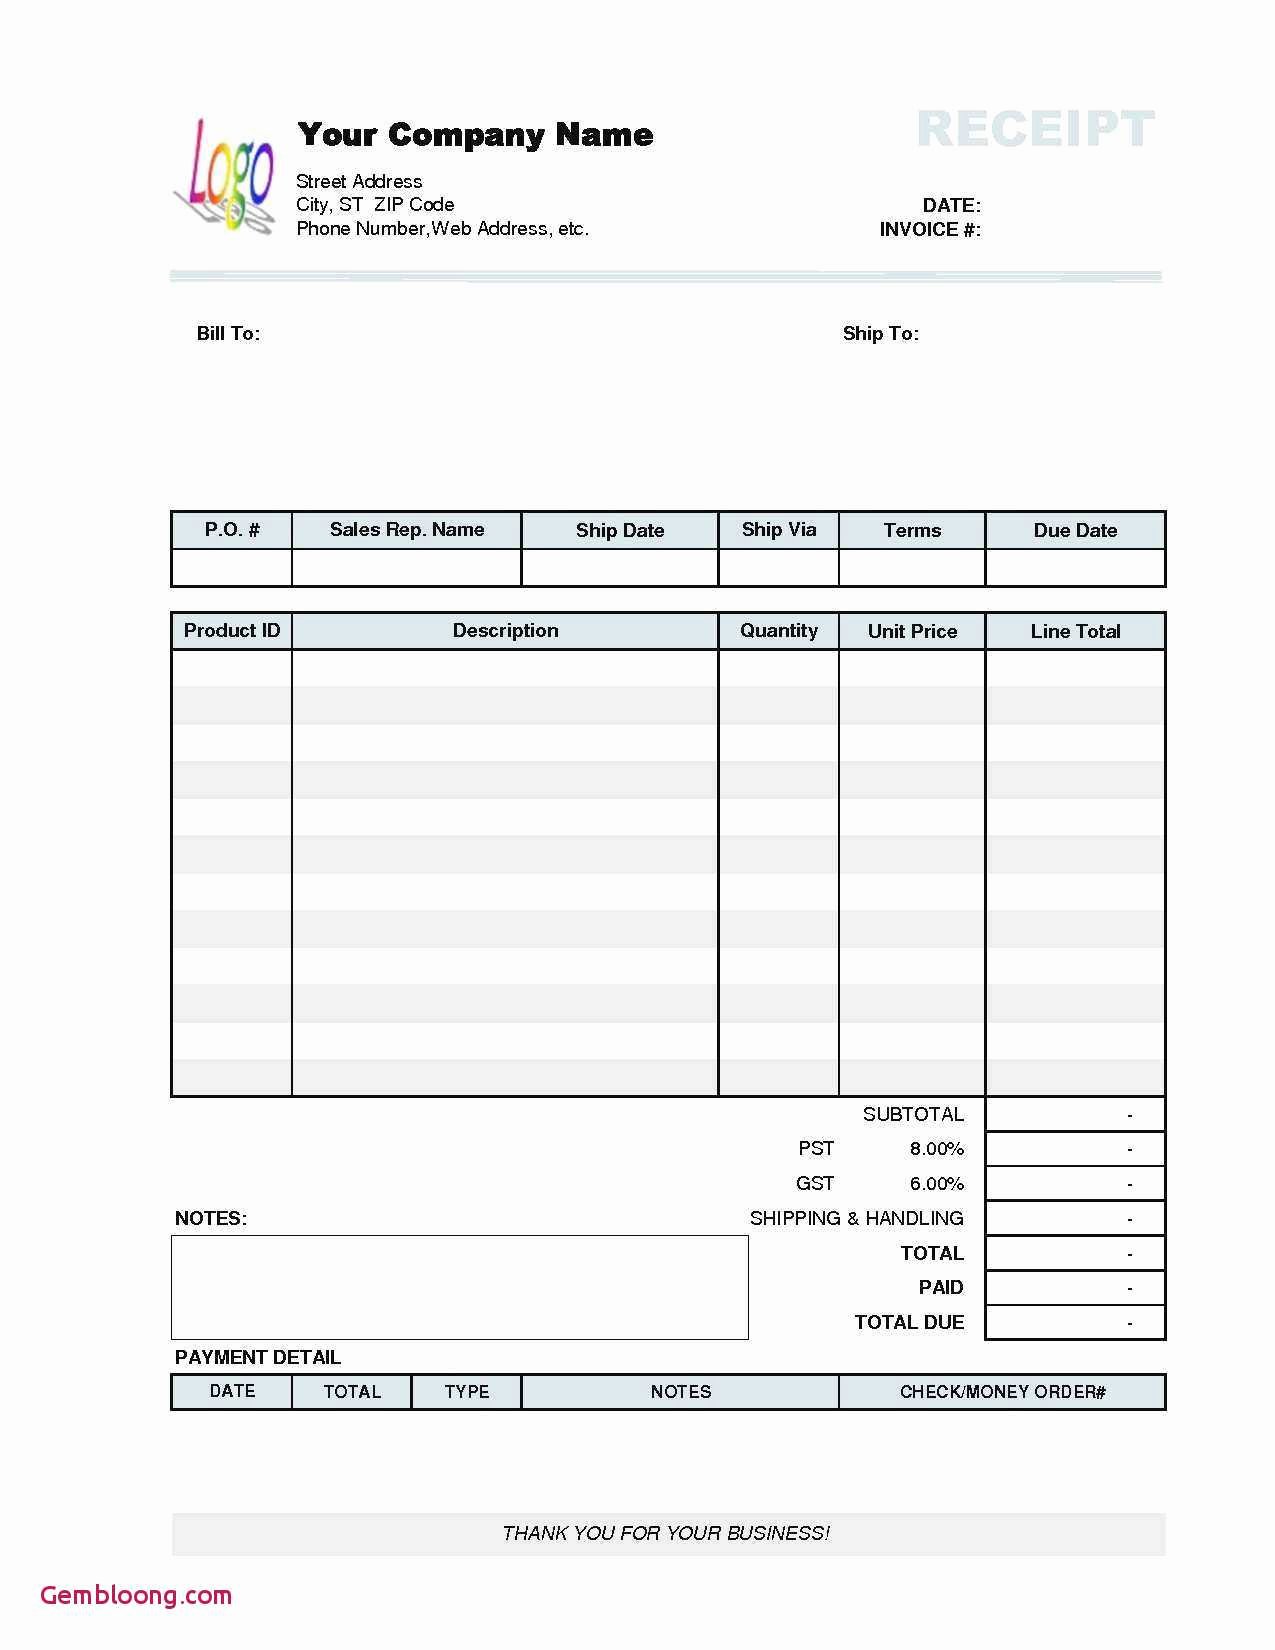 Fake Bank Statement Template Inspirational Create Fake Bank Statement Letter Examples Make A App Free